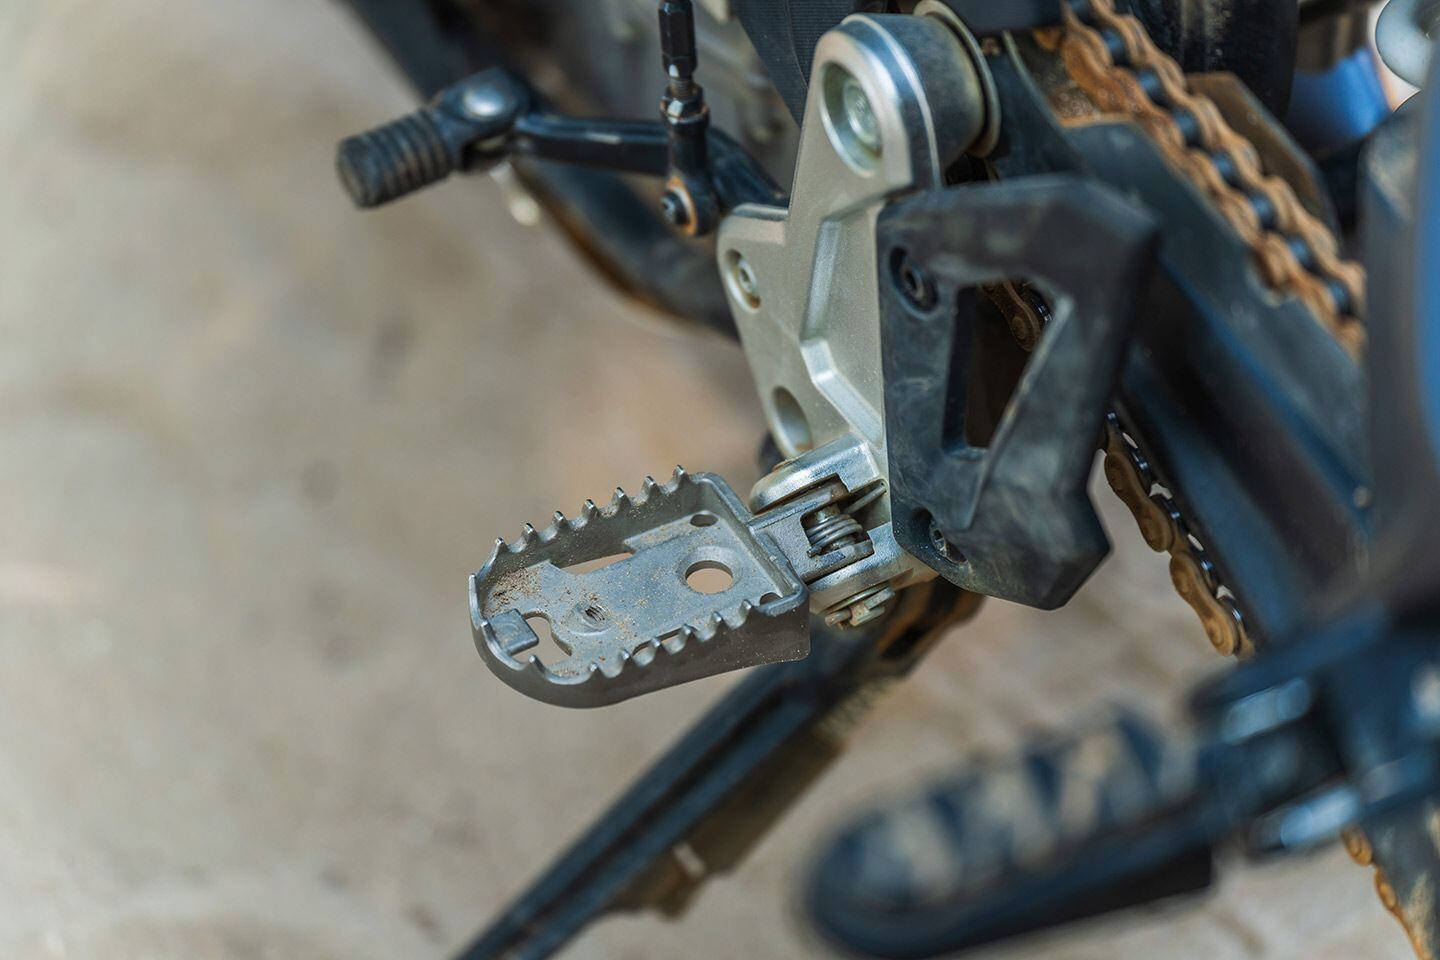 Rubber footpeg inserts are easily removed, revealing studded footpegs that are plenty aggressive for some spirited off-road riding.